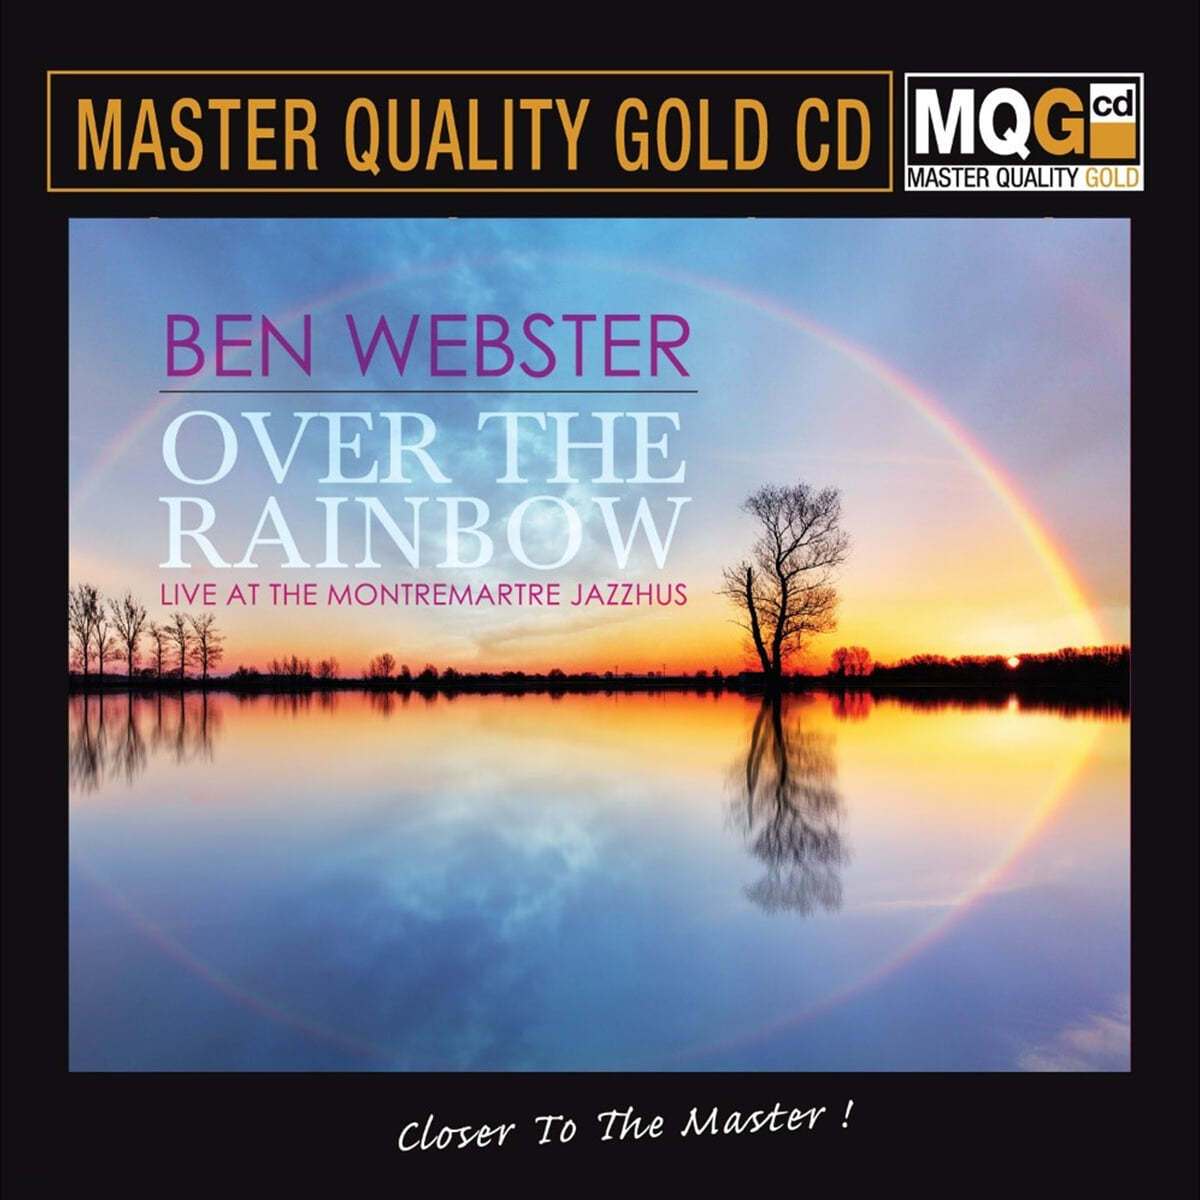 Ben Webster (벤 웹스터) - Over The Rainbow - Live At The Montremartre Jazzhus